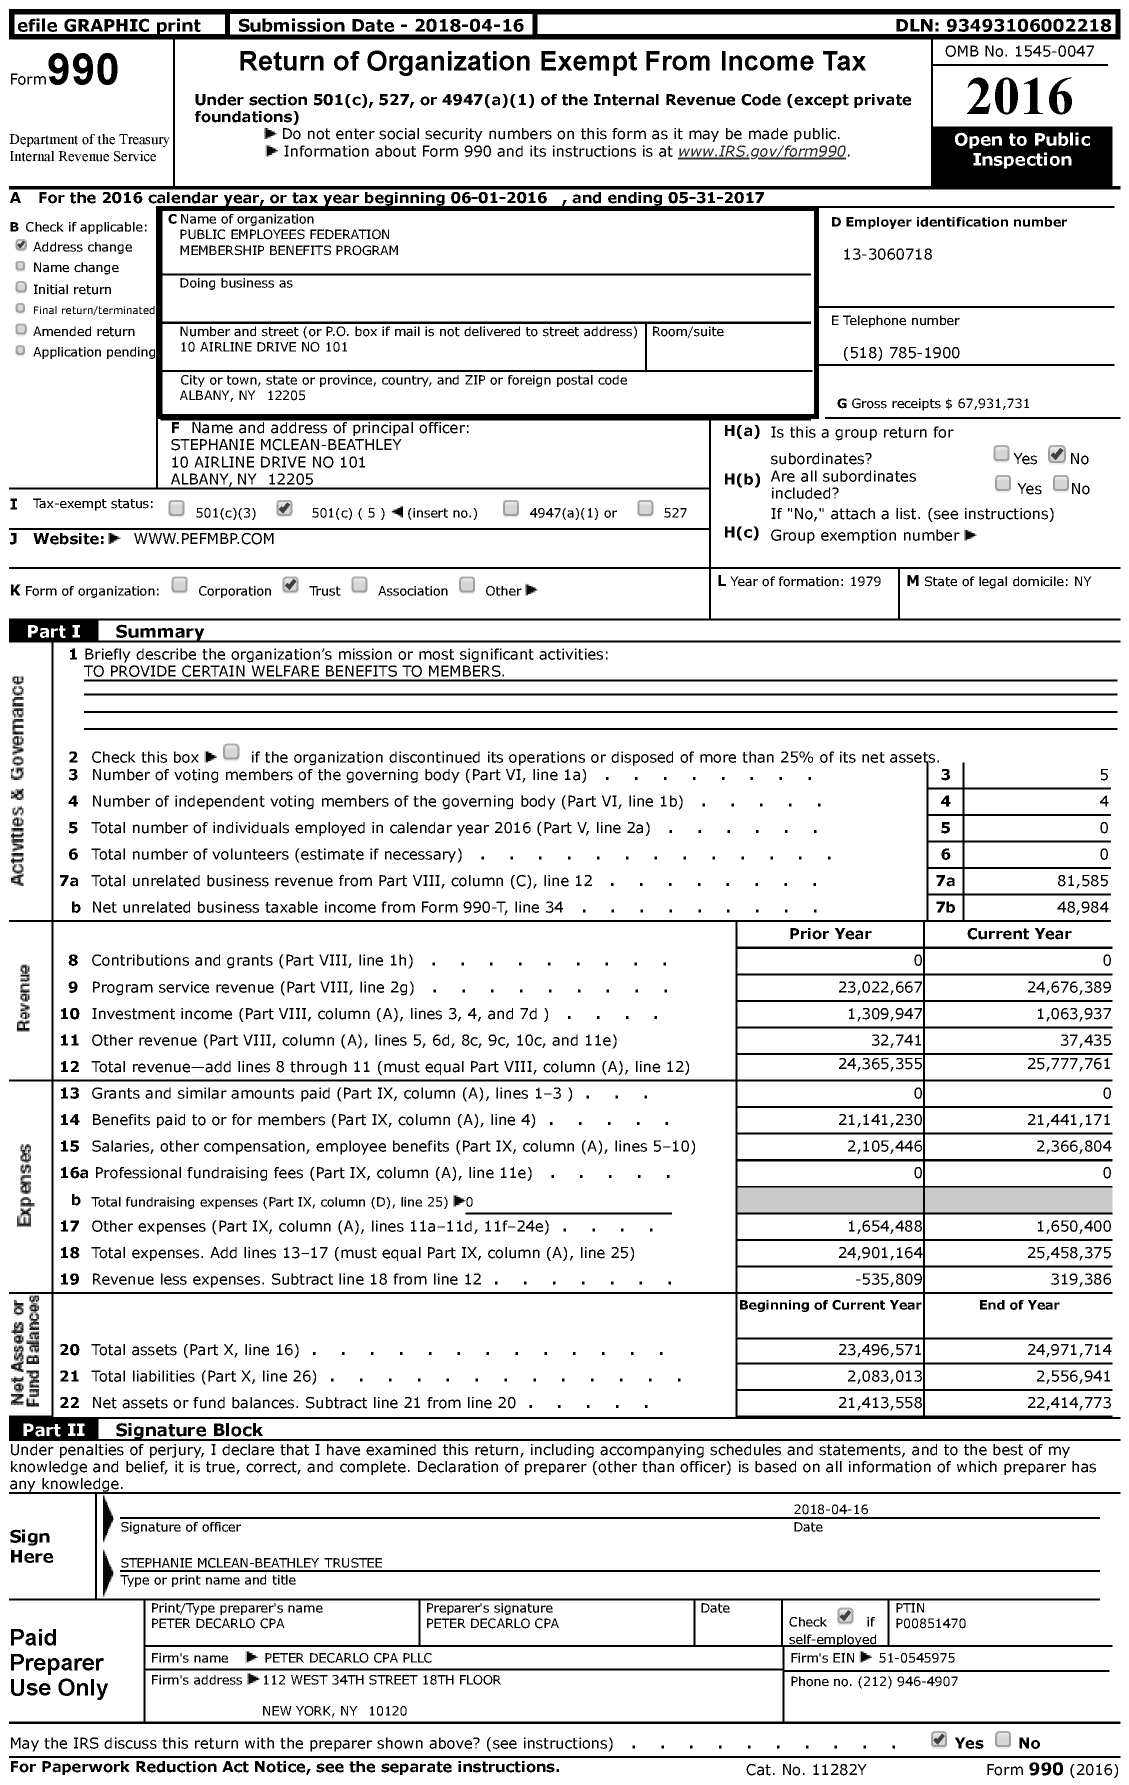 Image of first page of 2016 Form 990 for Public Employees Federation Membership Benefits Program